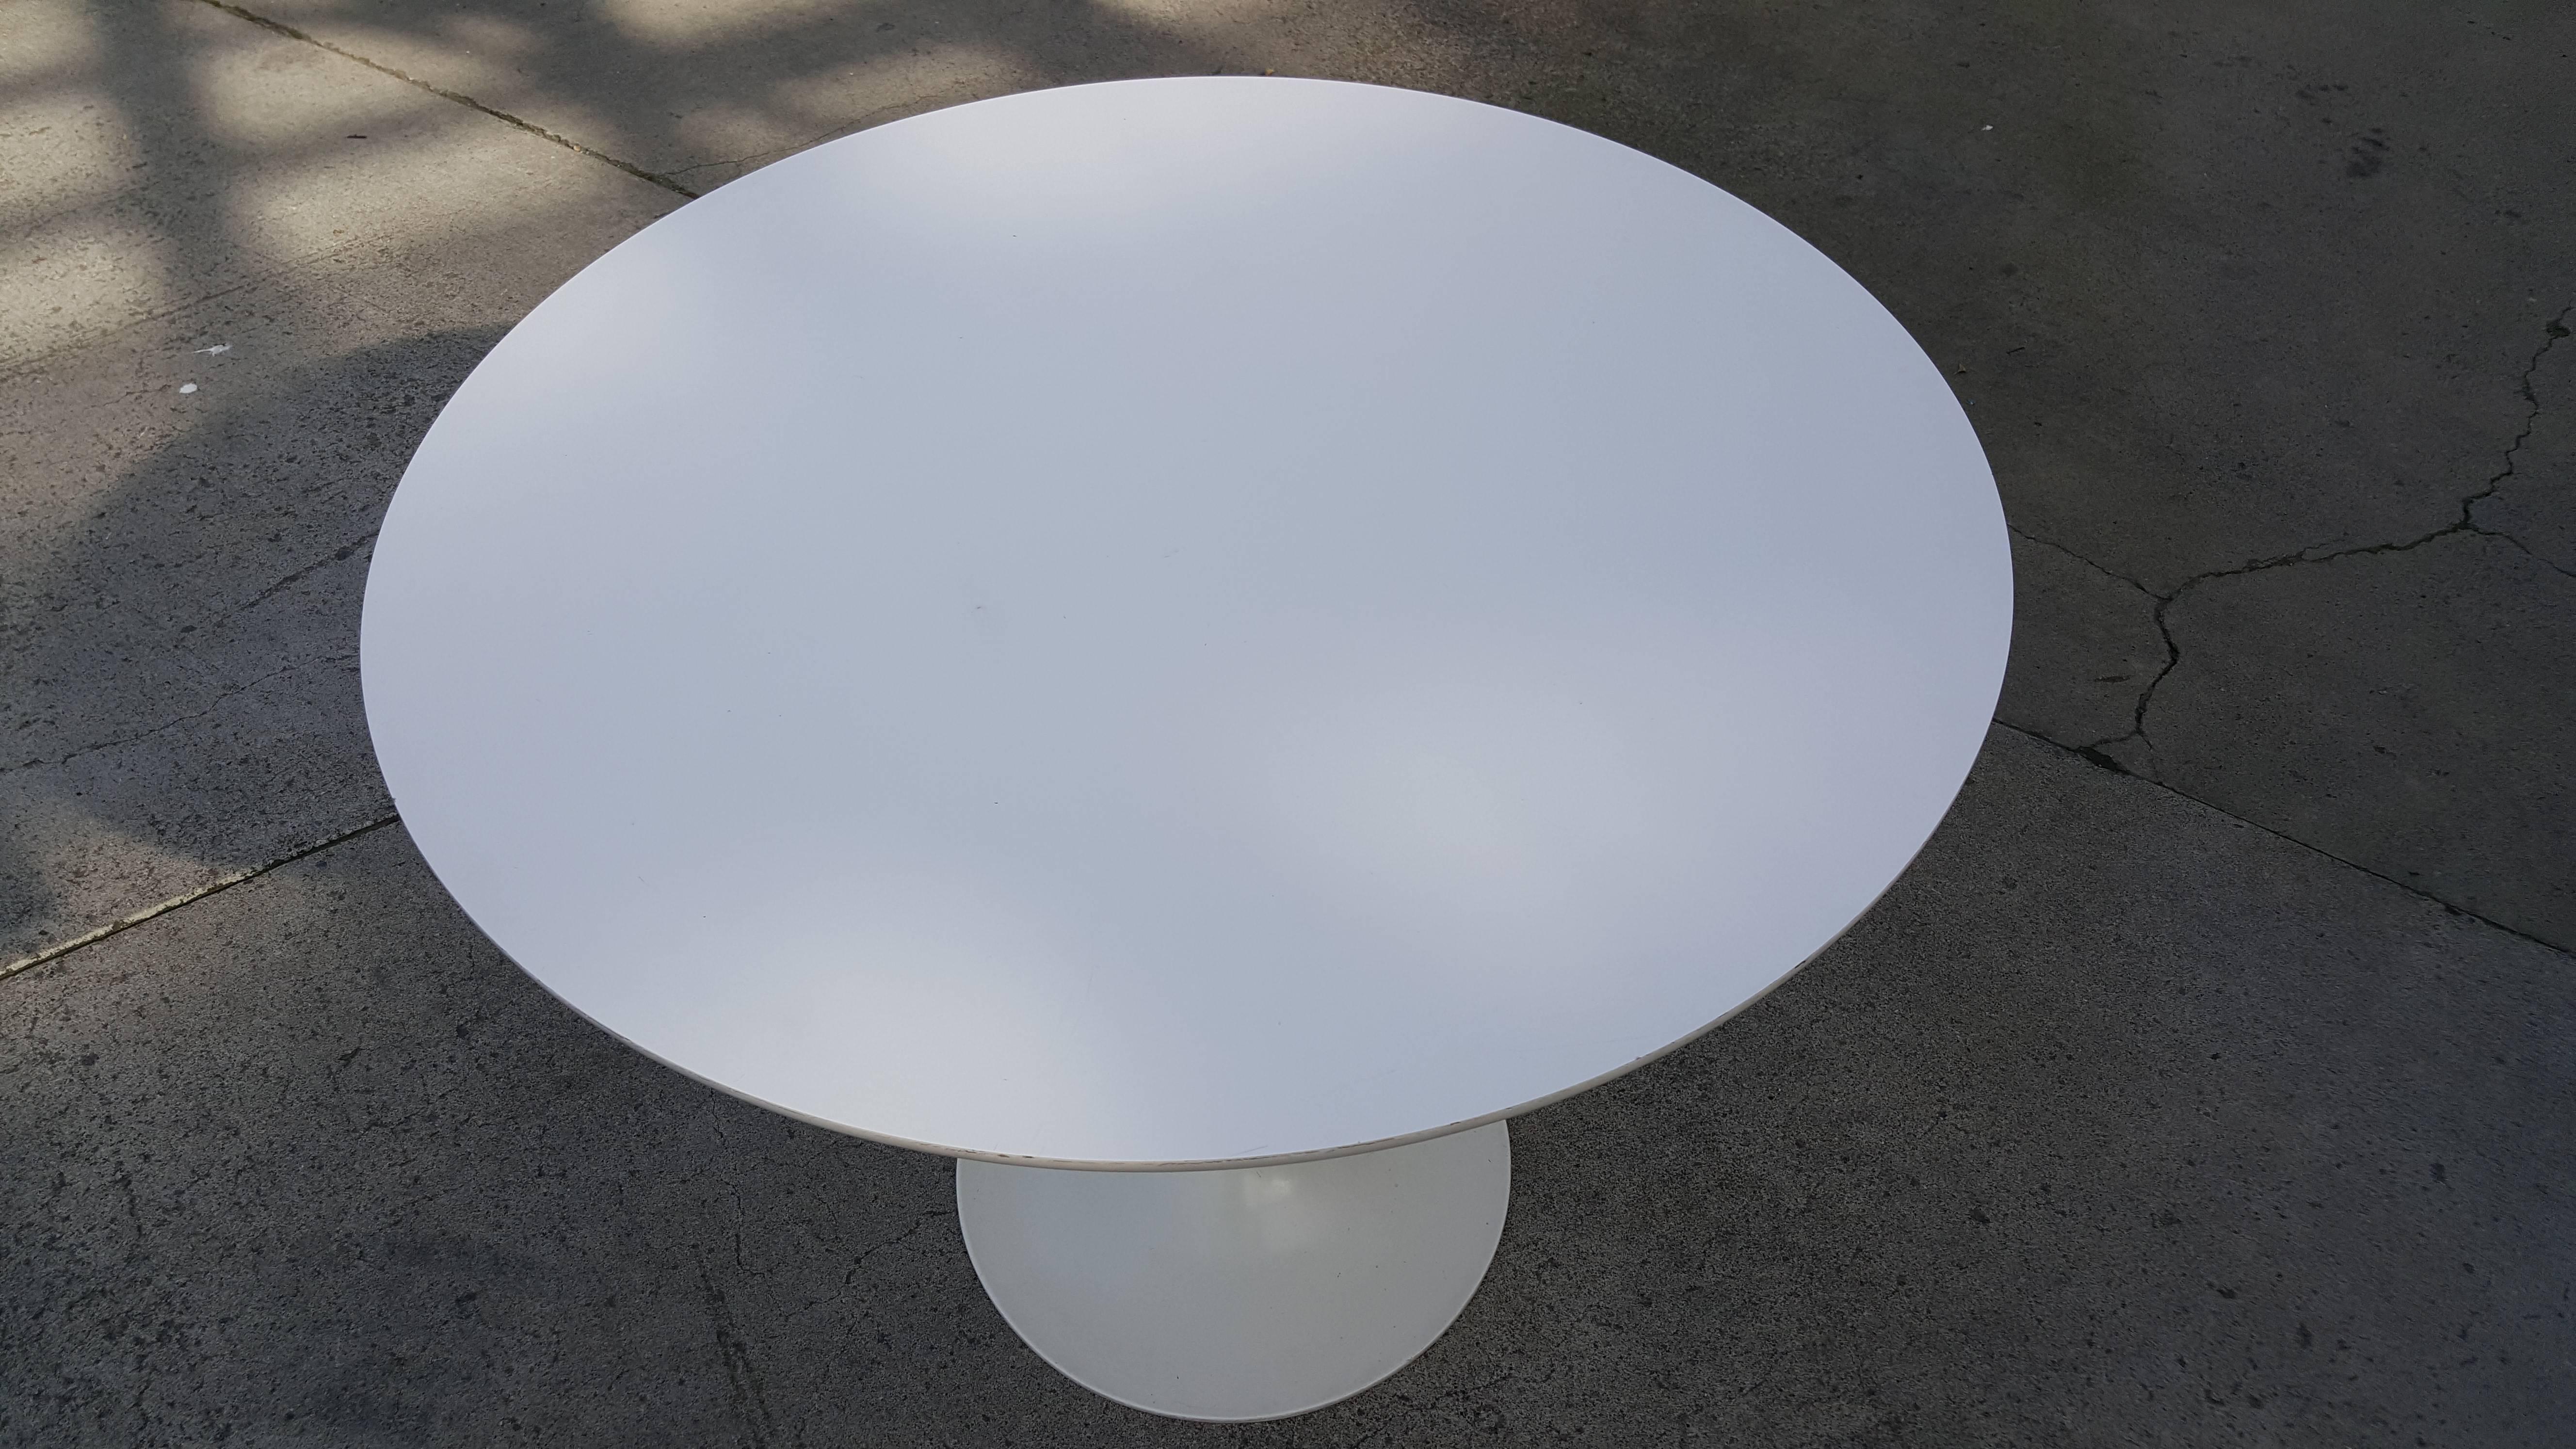 1970s Saarinen style tulip base dining table by Burke. In very good, original vintage condition. Apartment size with a 35.5" diameter tabletop.